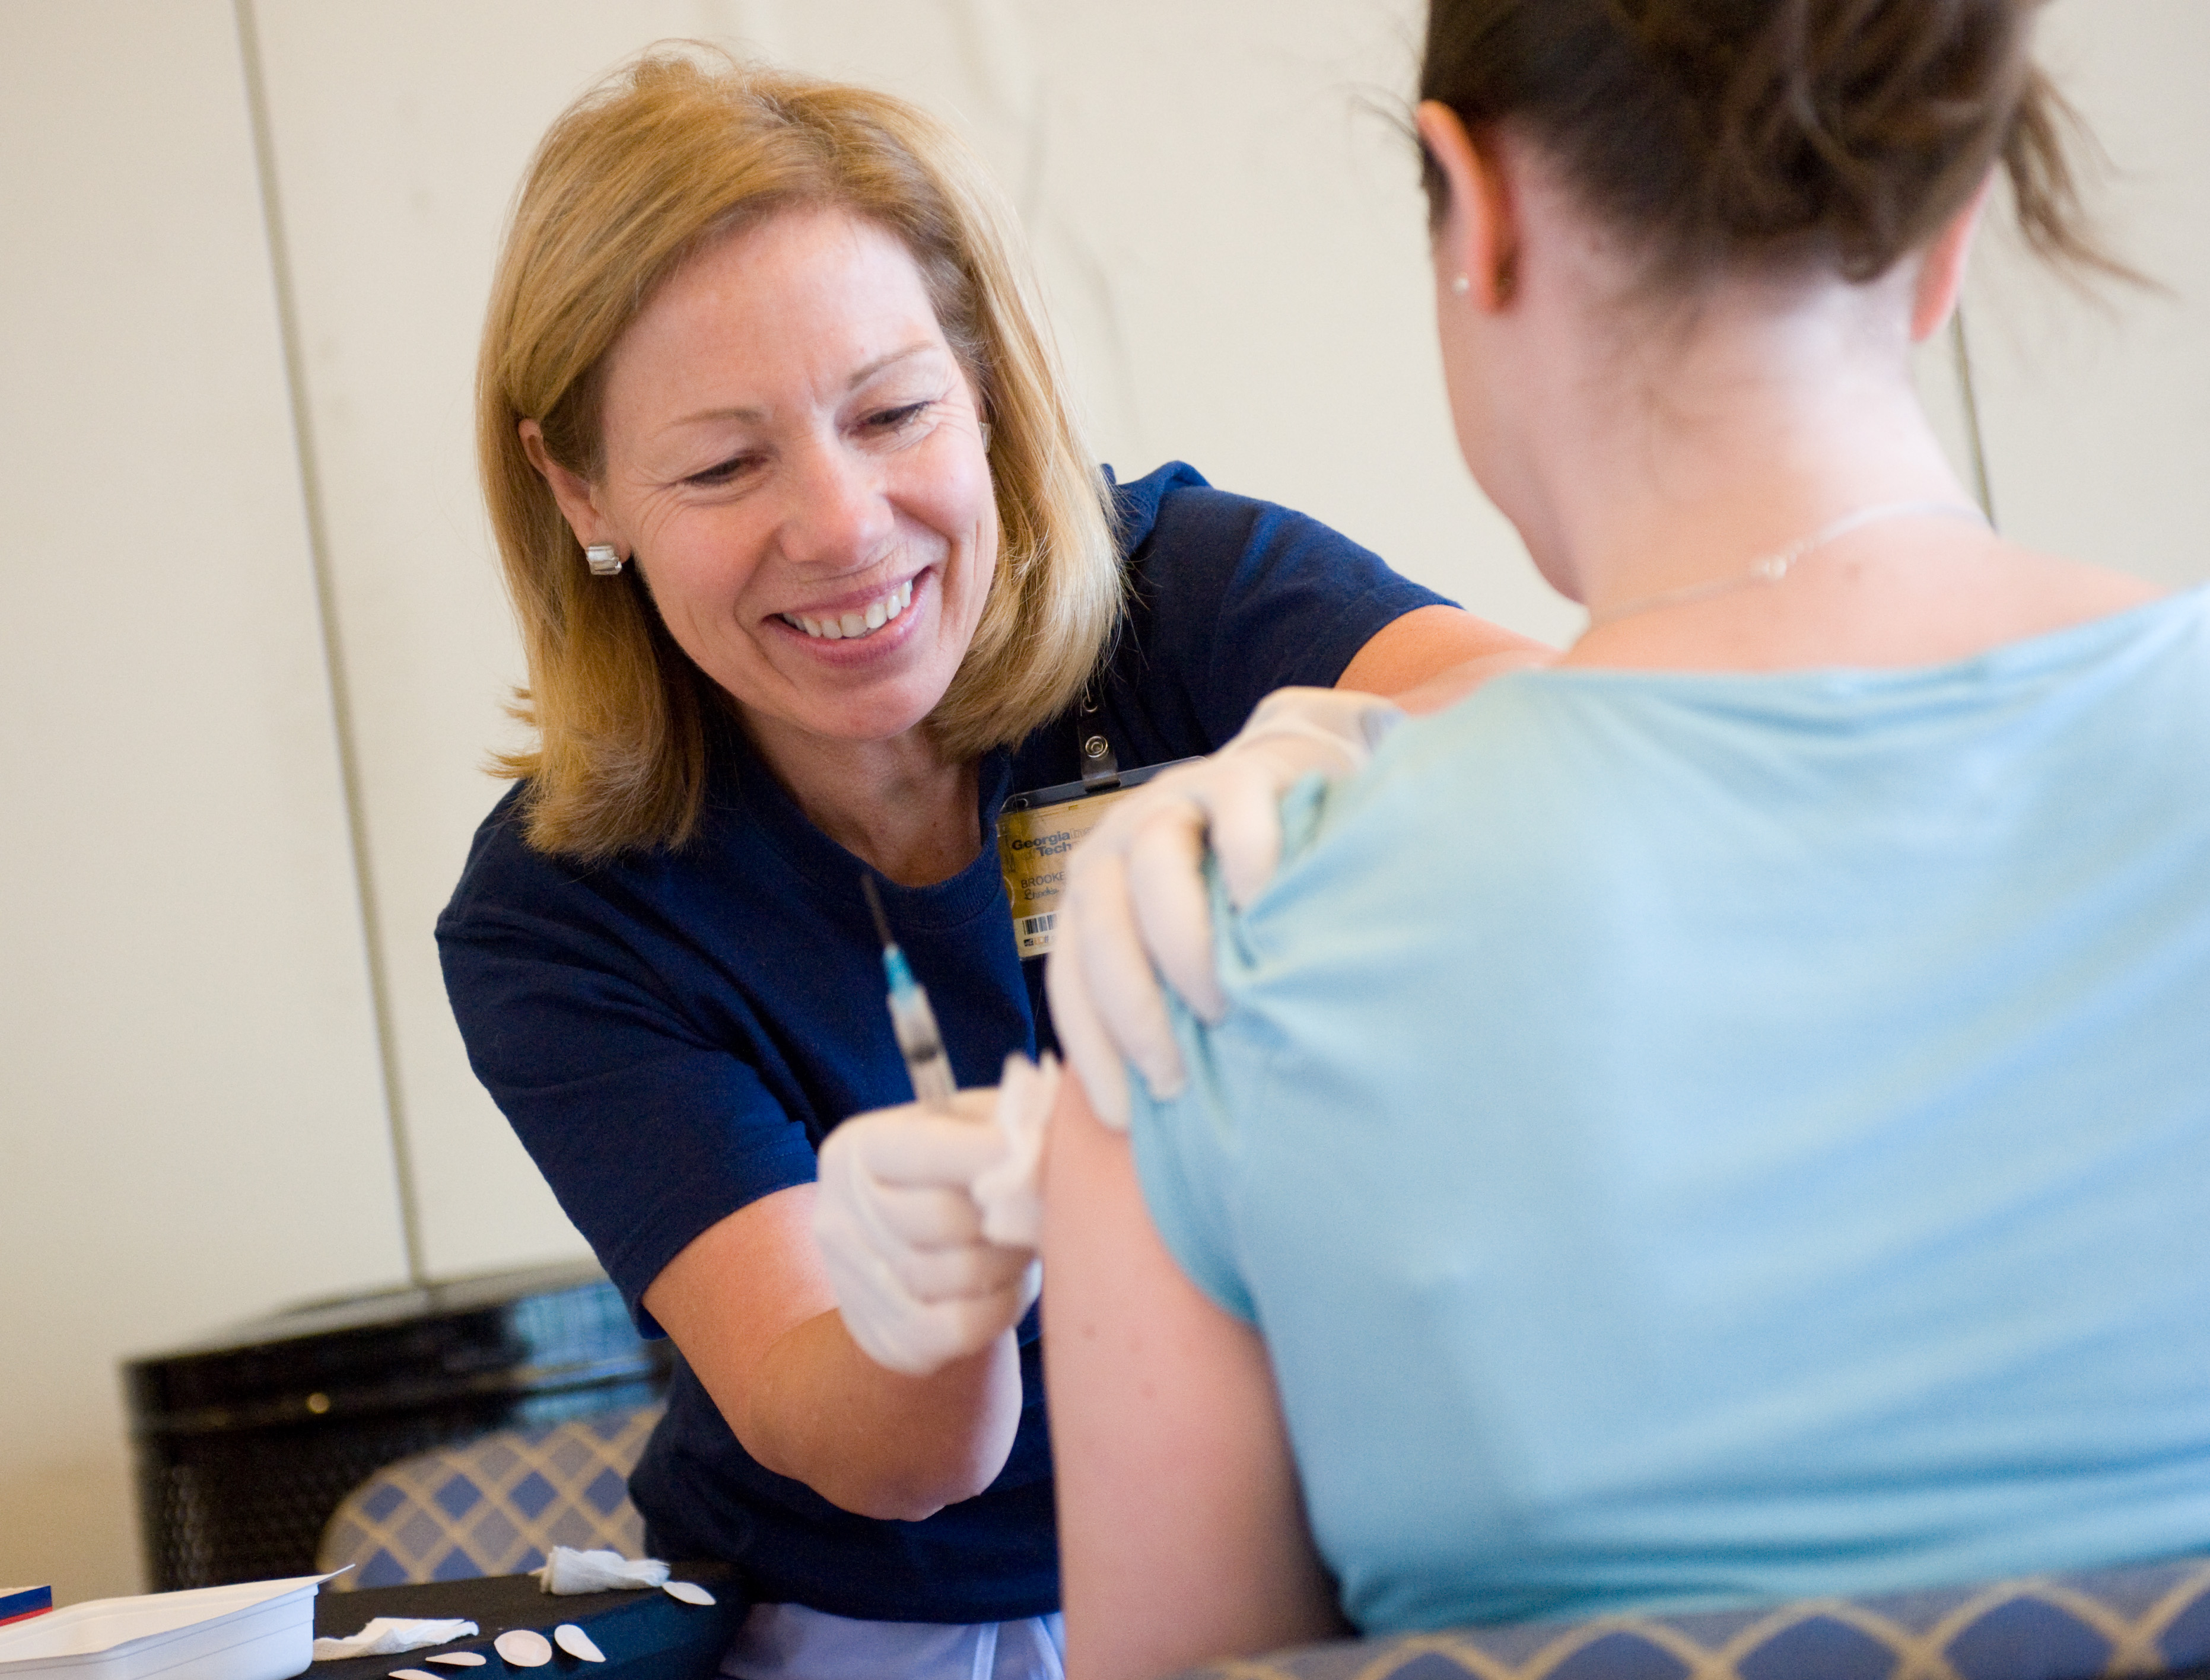 Stamps Health Services offers flu shots to students, faculty, and staff.